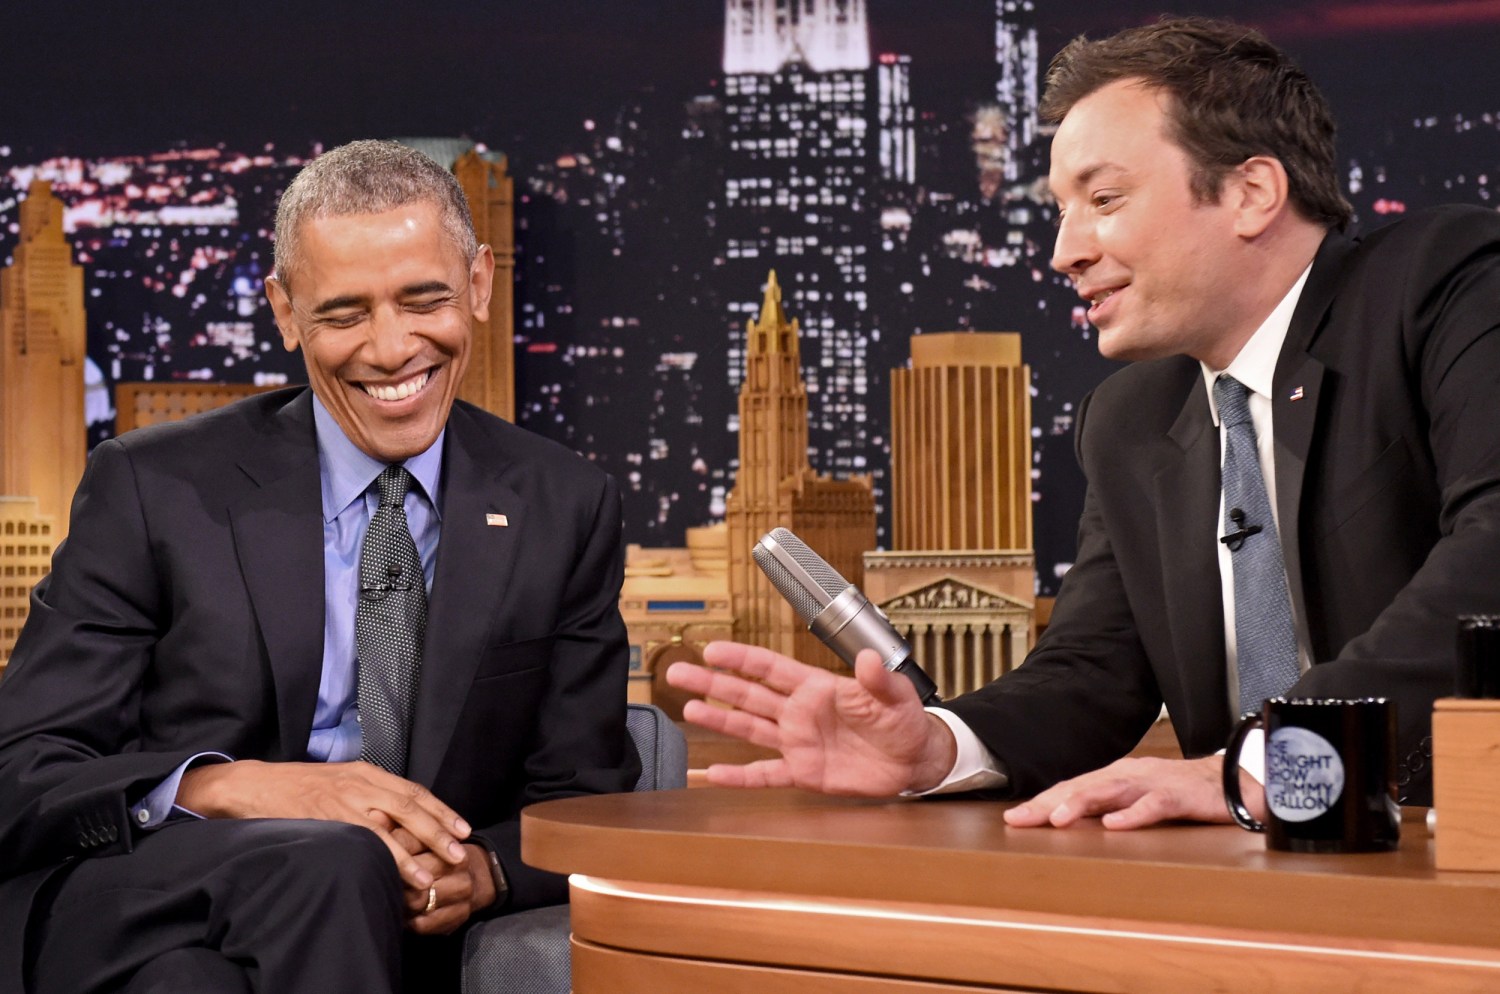 Comedian-in-Chief: Obama's Funniest Moments as President